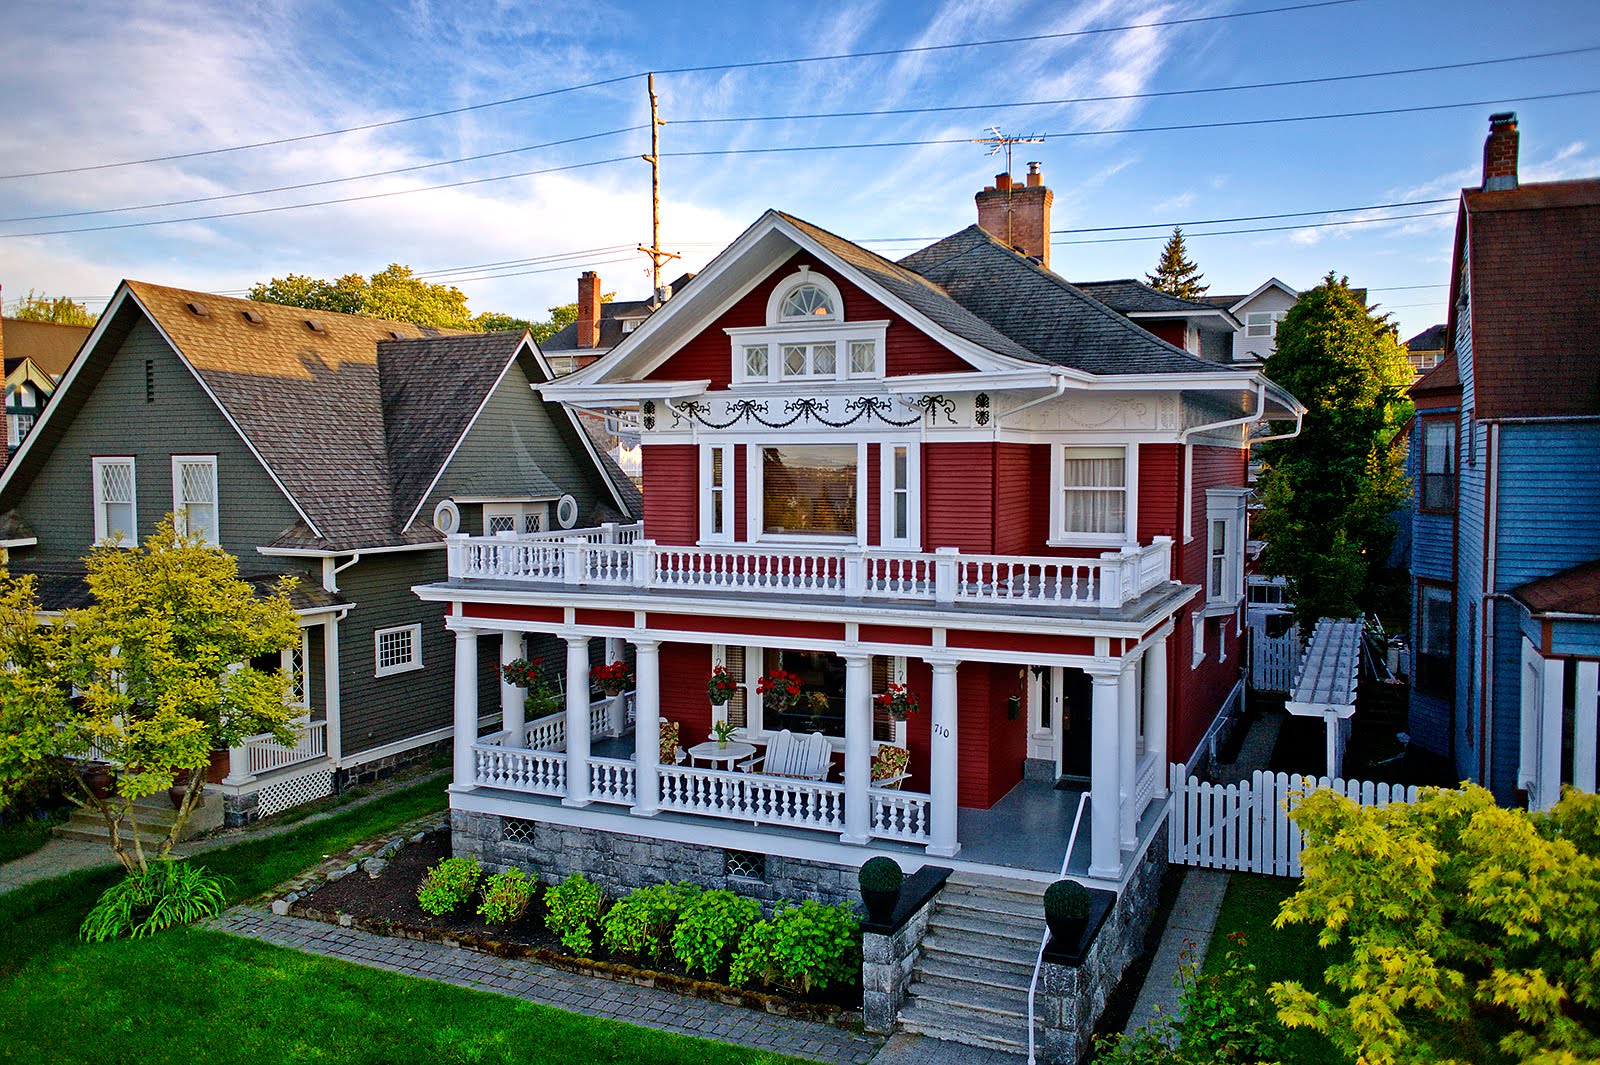 TACOMA'S HISTORIC DISTRICT AND ALL THINGS OLD!: FABULOUS HISTORIC HOME